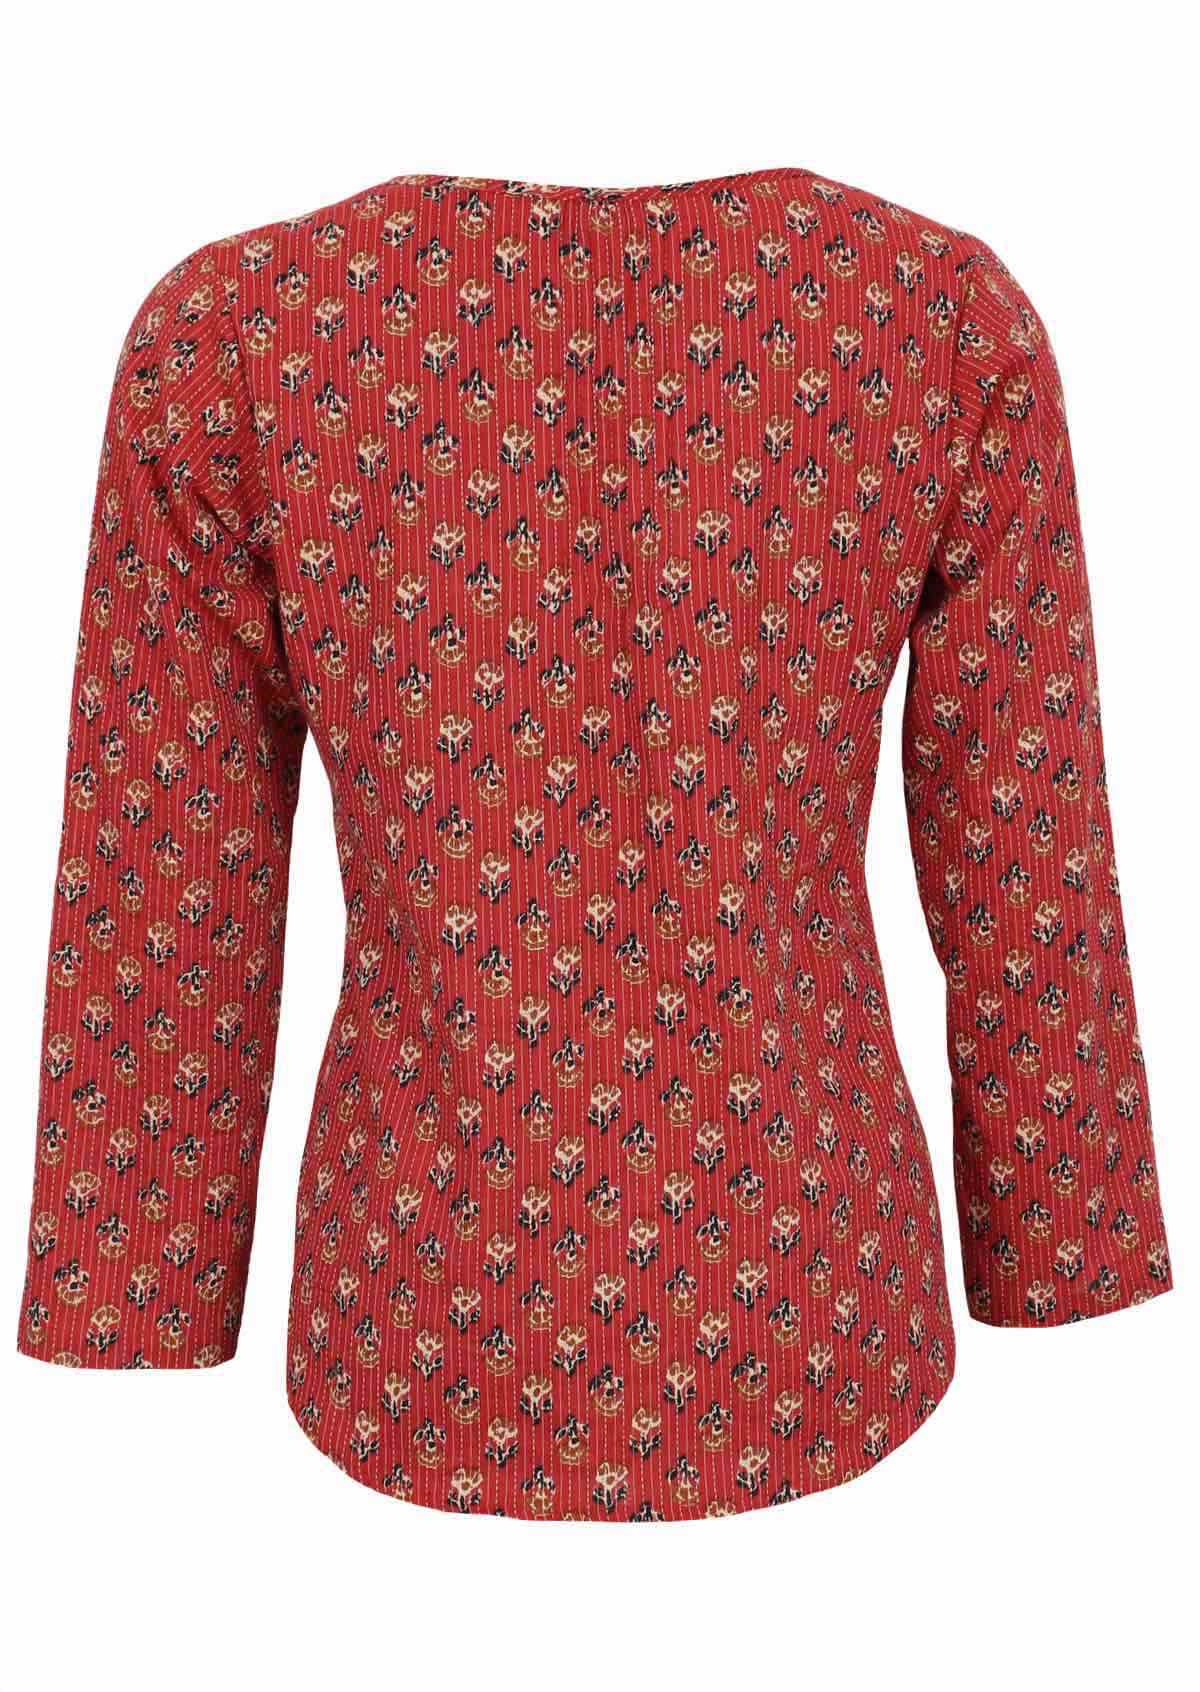 Lightweight cotton long sleeve top in red with sweet flowers and kantha stitches